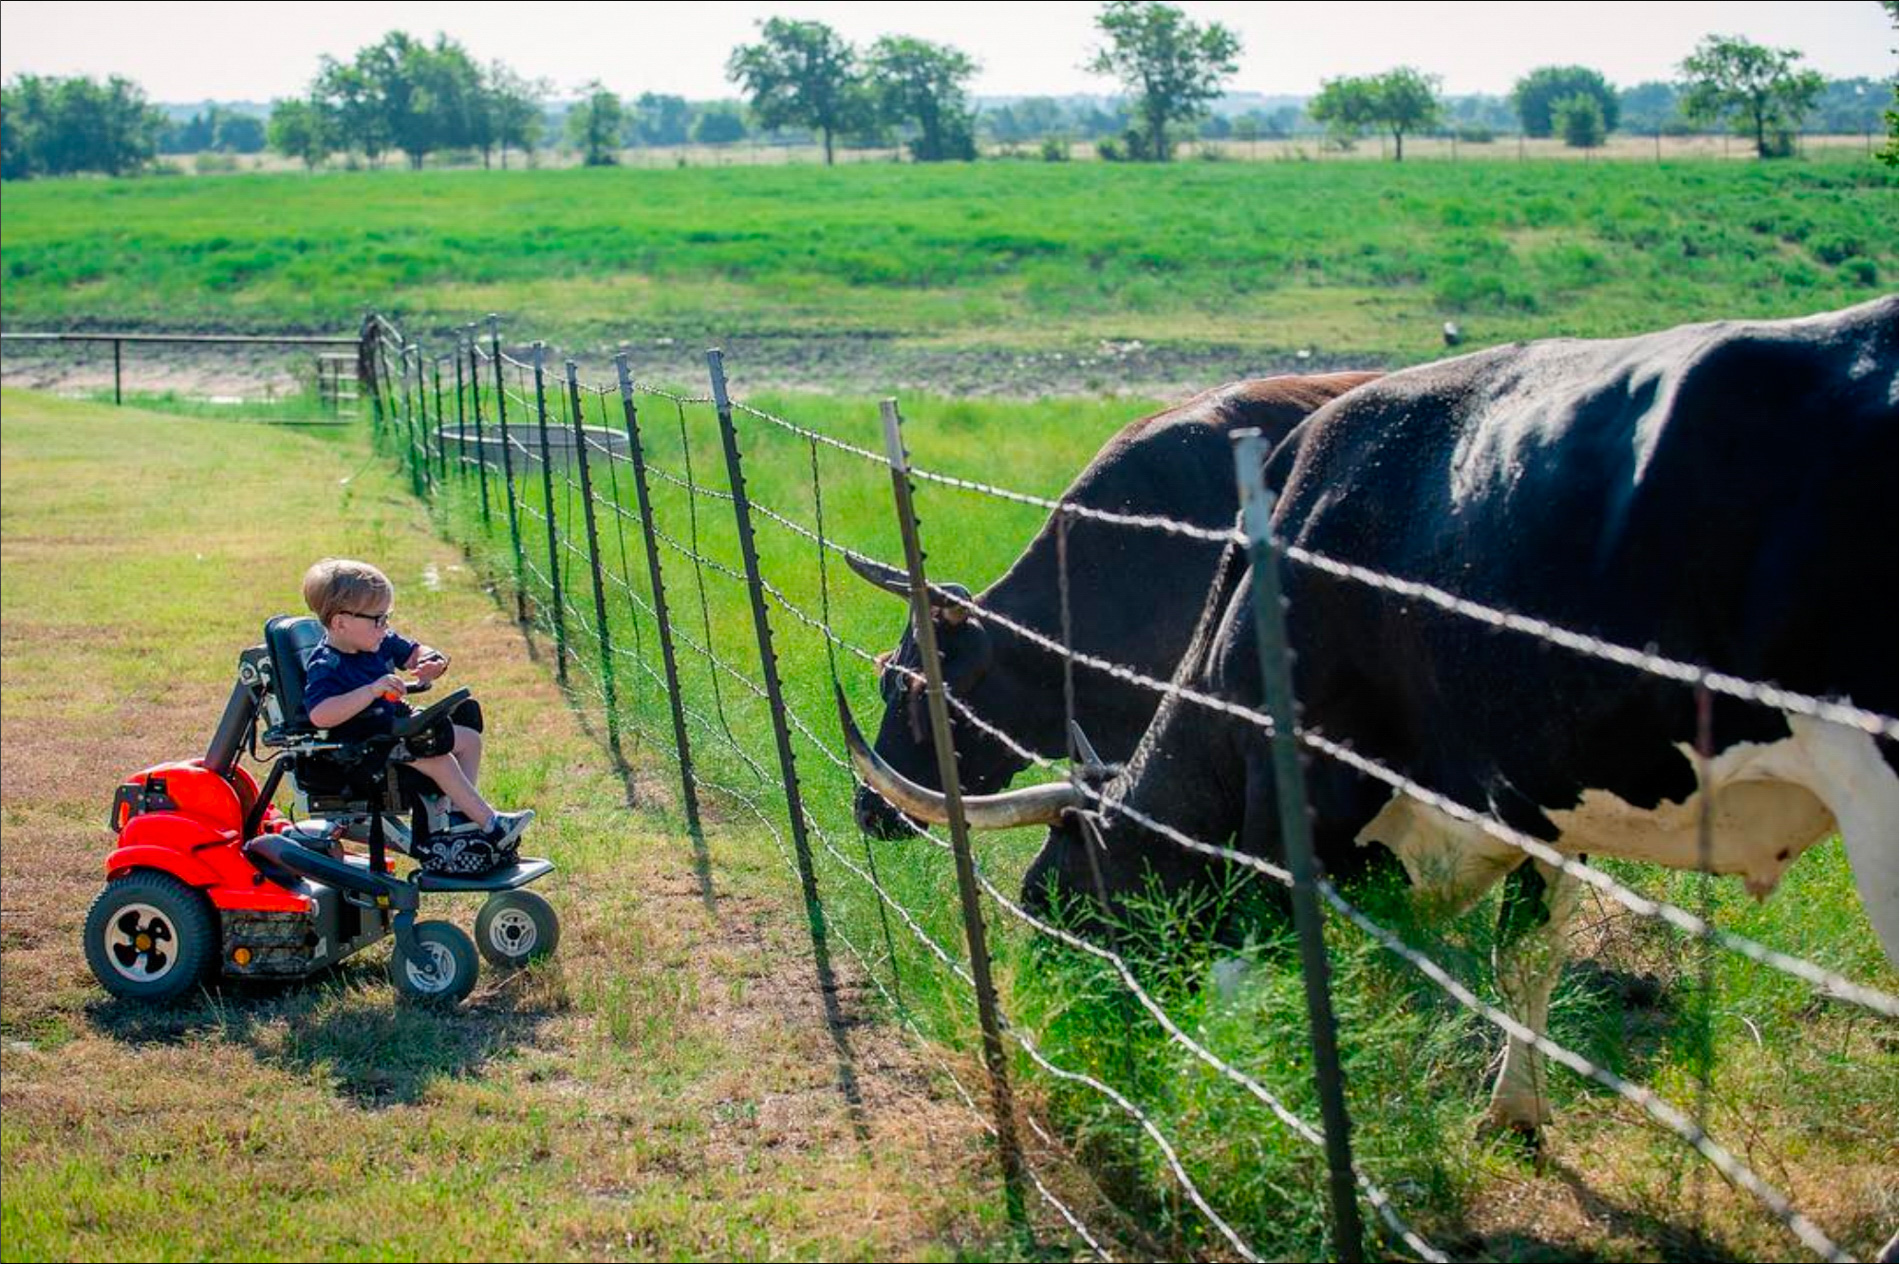 Able and the Cattle